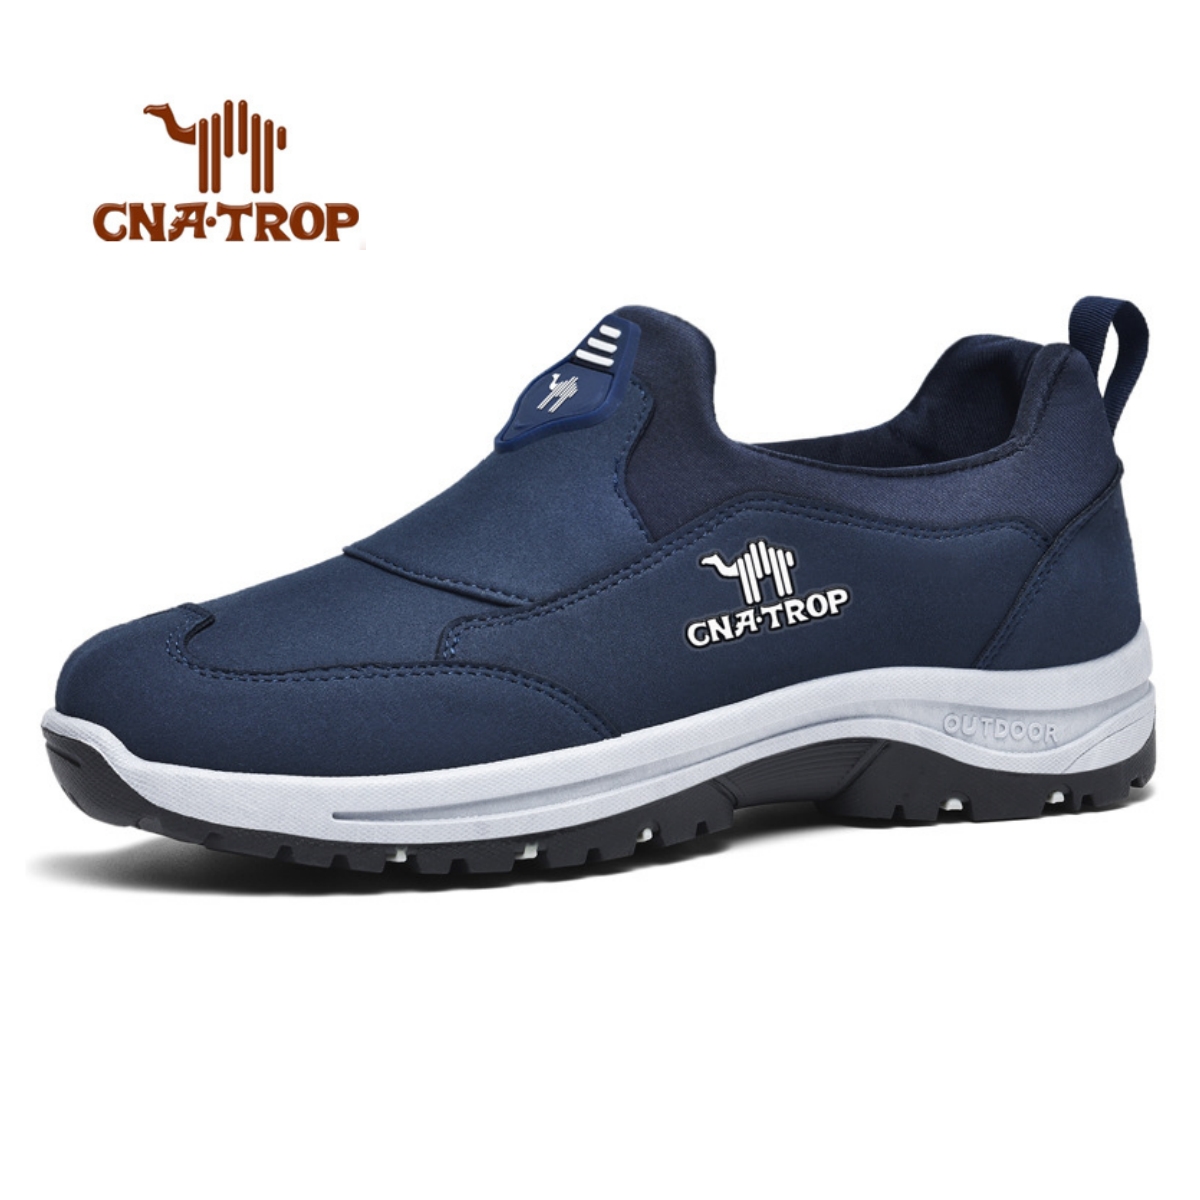 Lightweight and comfortable slip-on soft-soled casual shoes for outdoor walking sports shoes for men